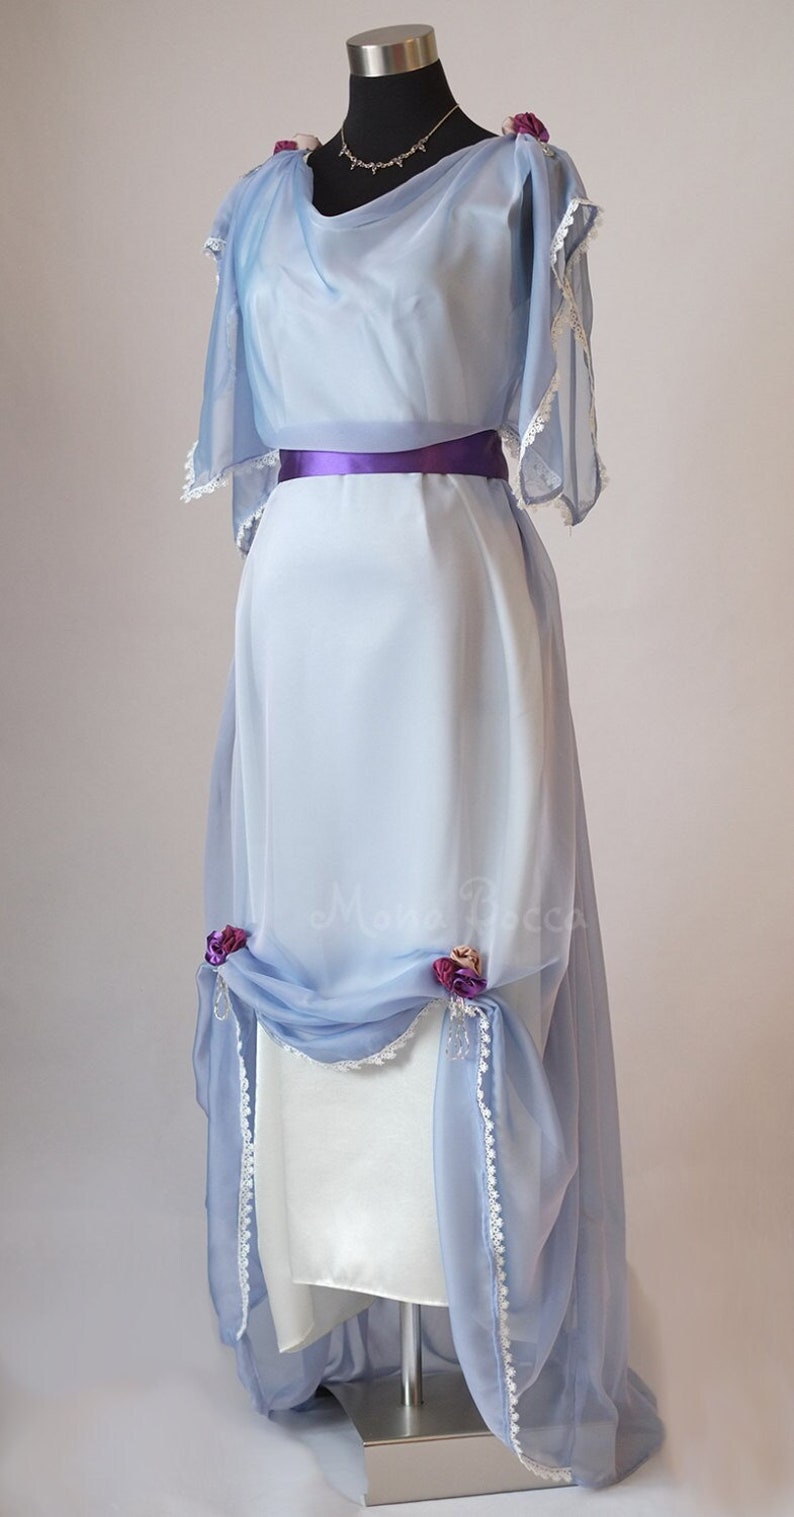 Old Fashioned Dresses | Old Dress Styles     Edwardian light blue evening dress Gilded Age Downton Abbey inspired Titanic styled dress Made in England  AT vintagedancer.com